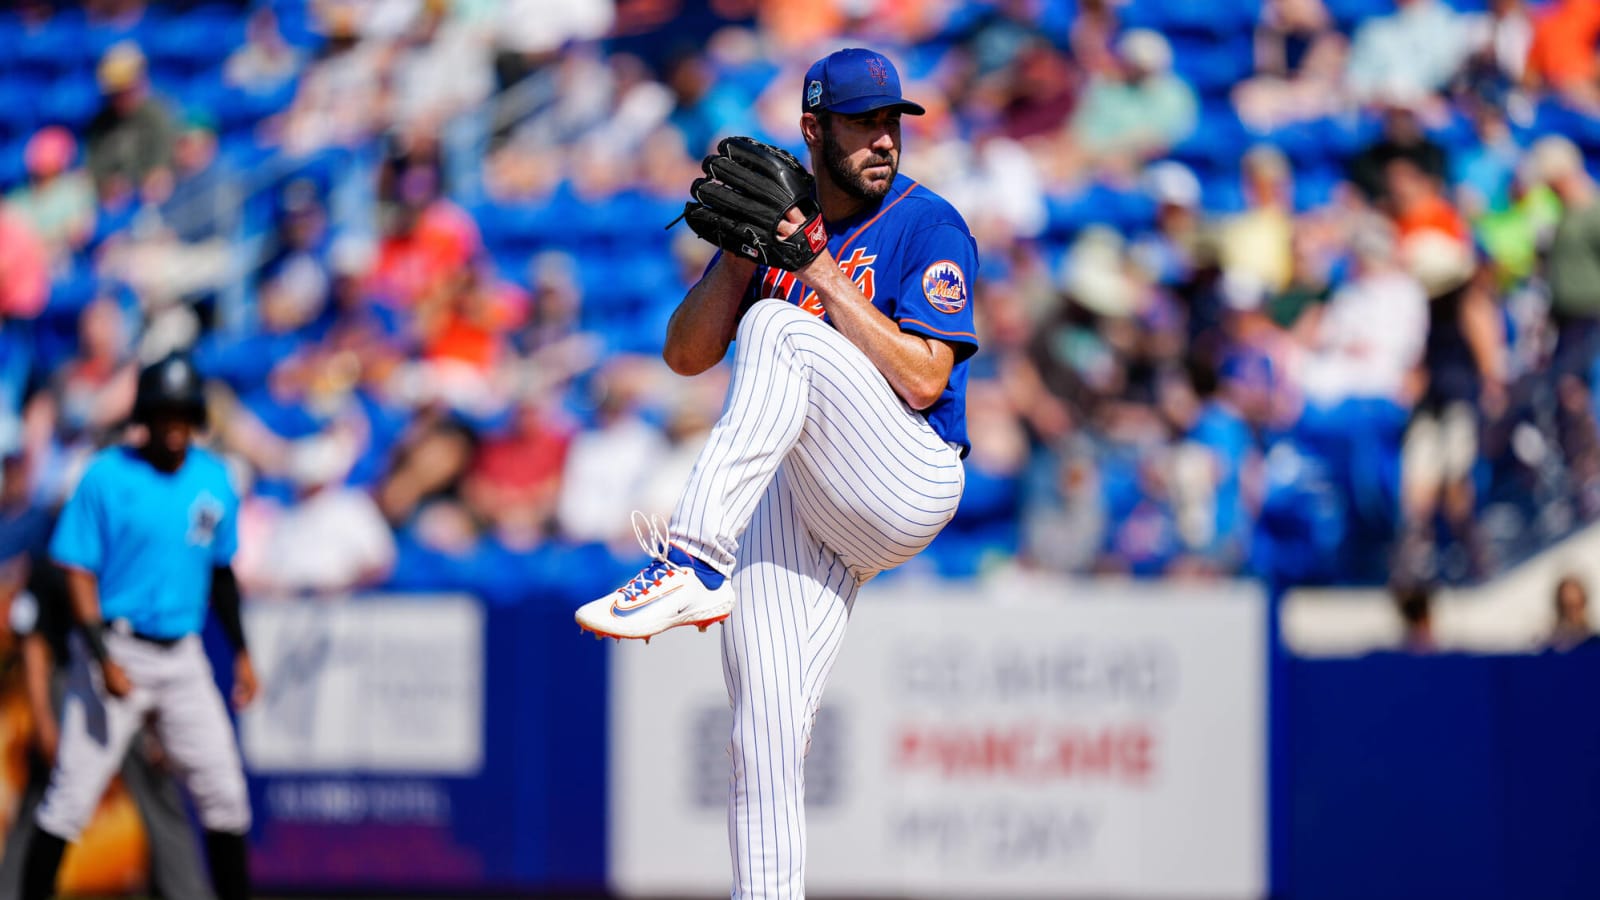 Mets ace scheduled for Double-A rehab start on Friday